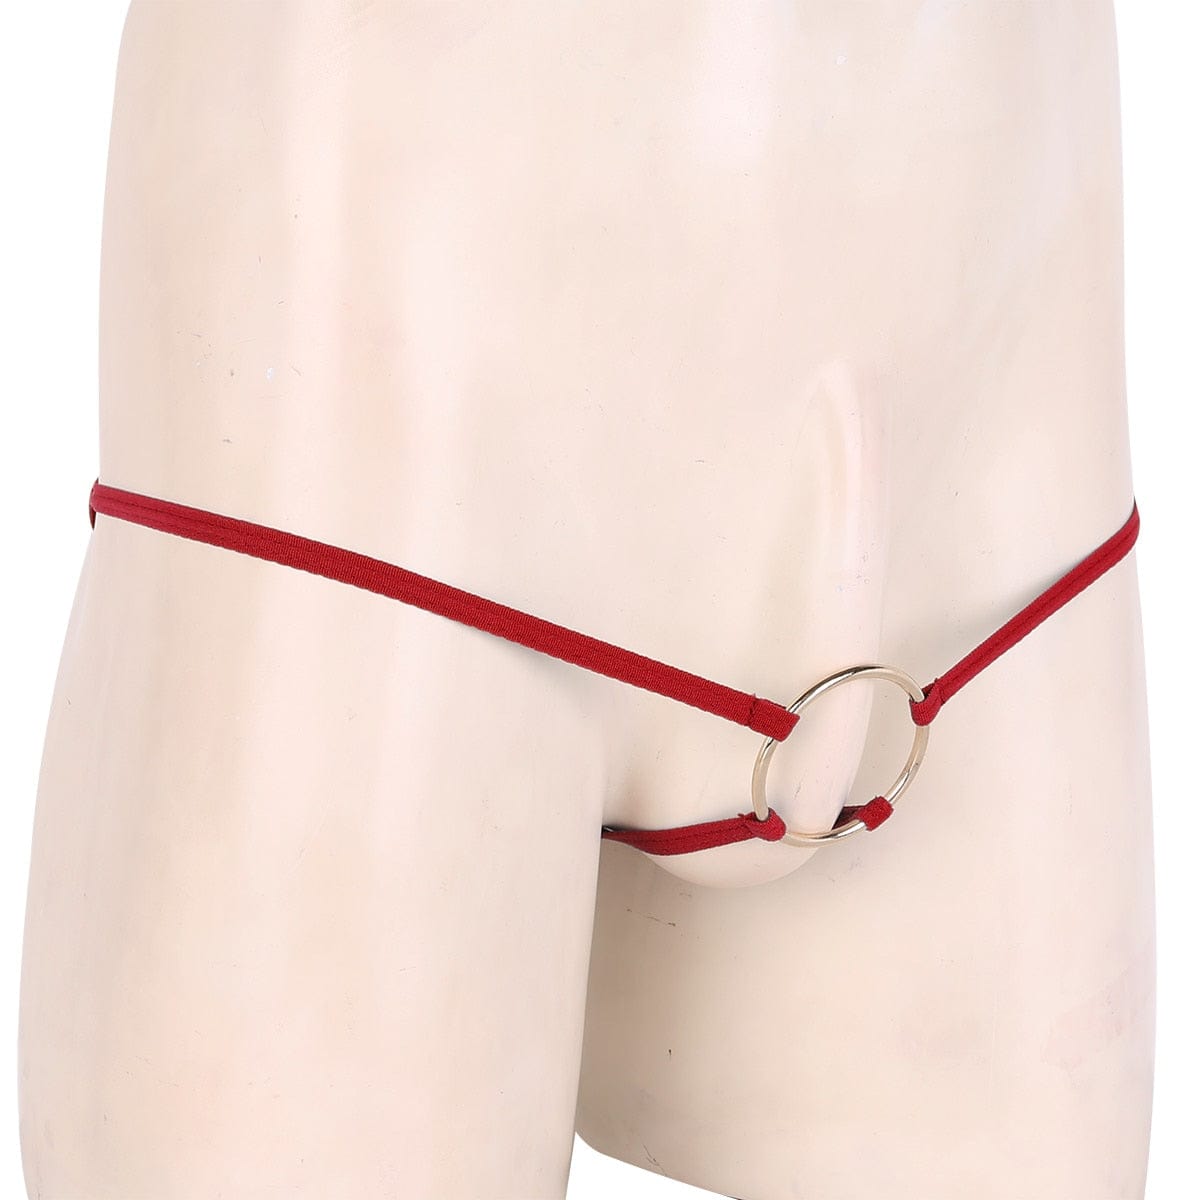 Kinky Cloth G-String Crotchless Open Butt Thong